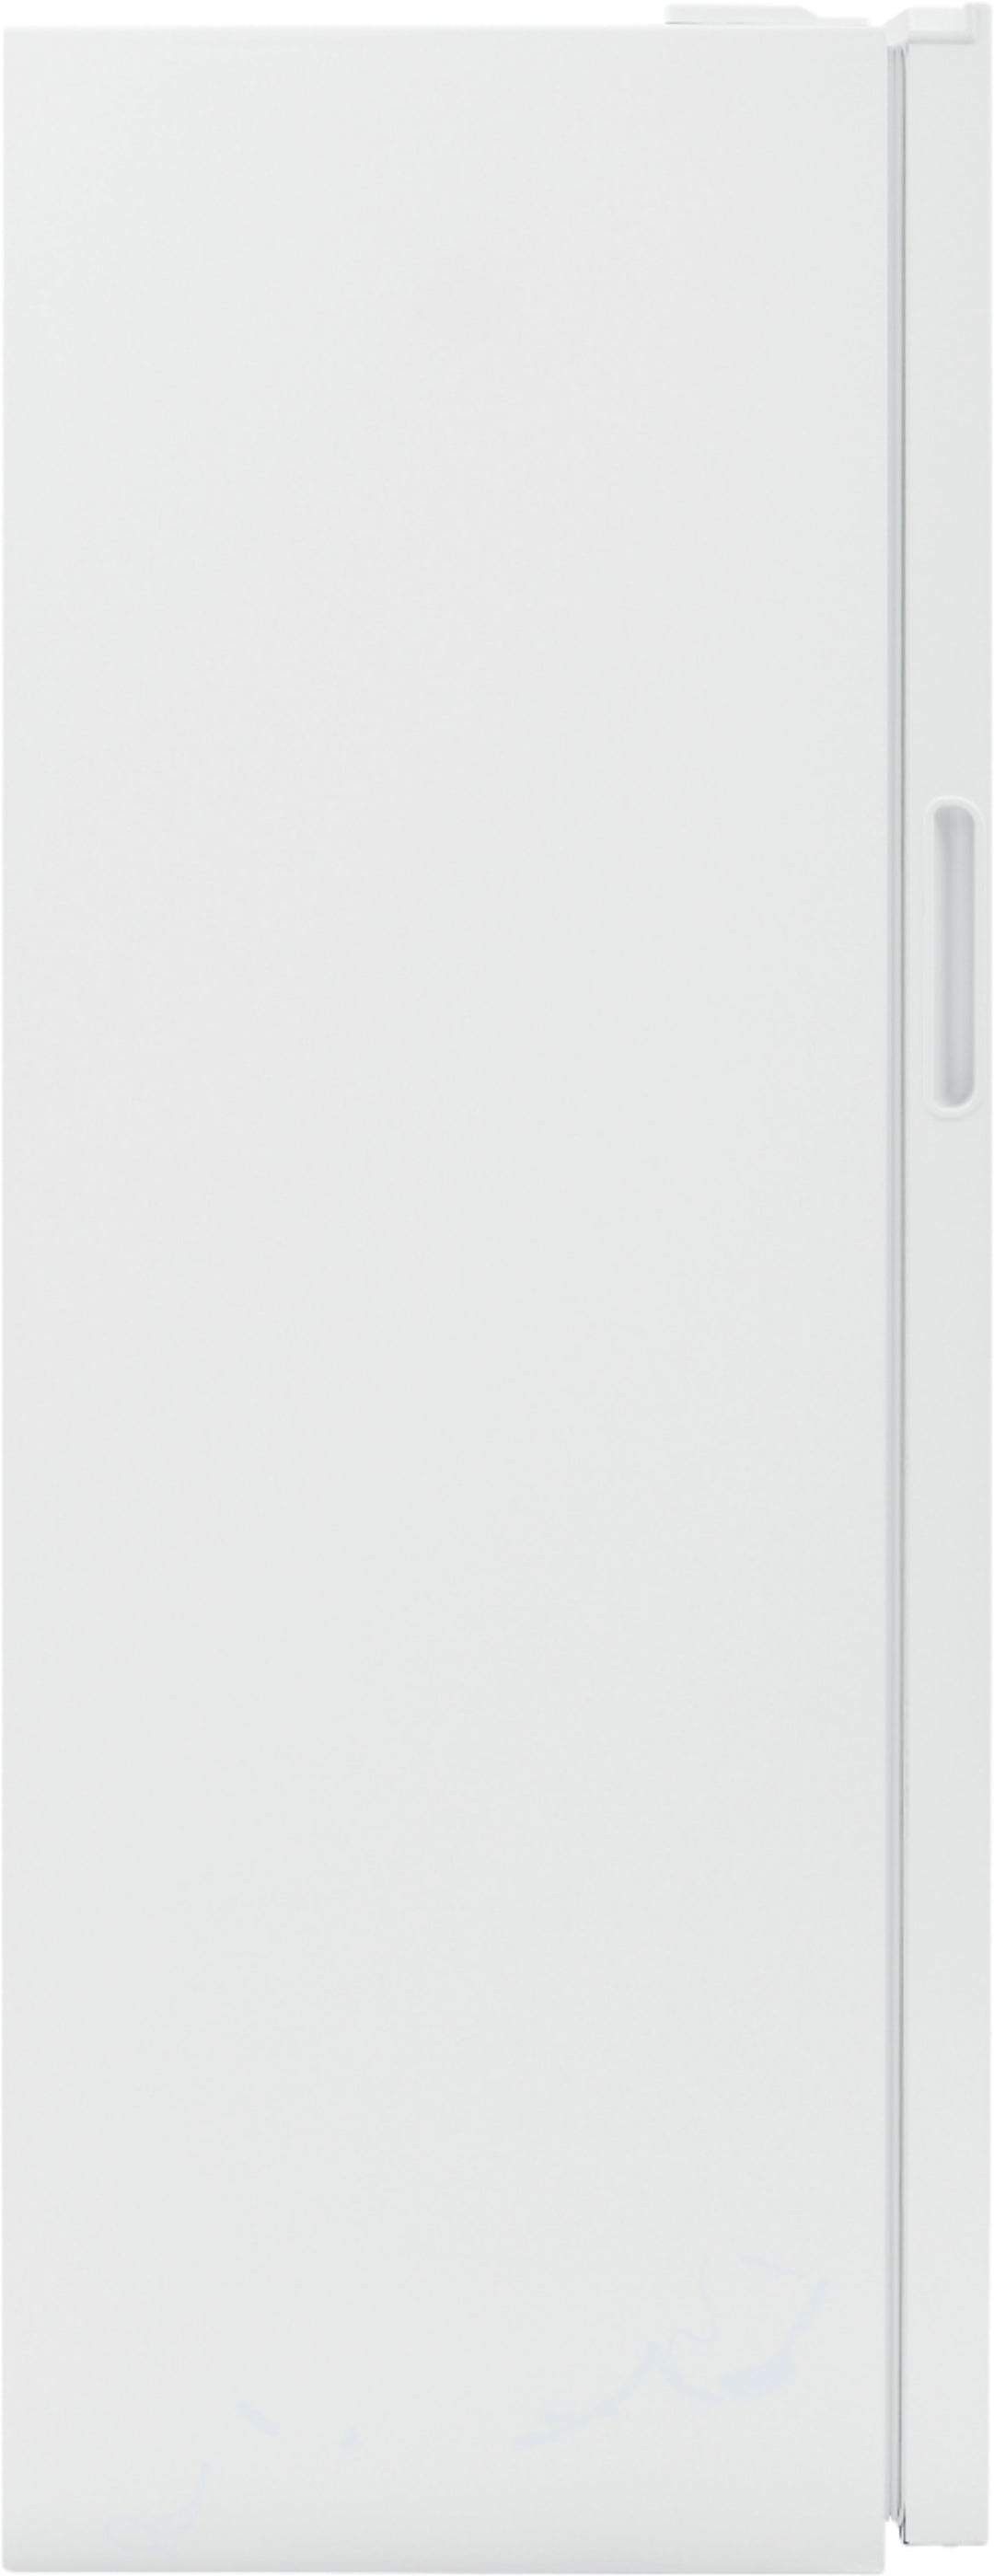 Frigidaire - 13.0 Cu. Ft. Frost-Free Upright Freezer with Interior Light - White_3